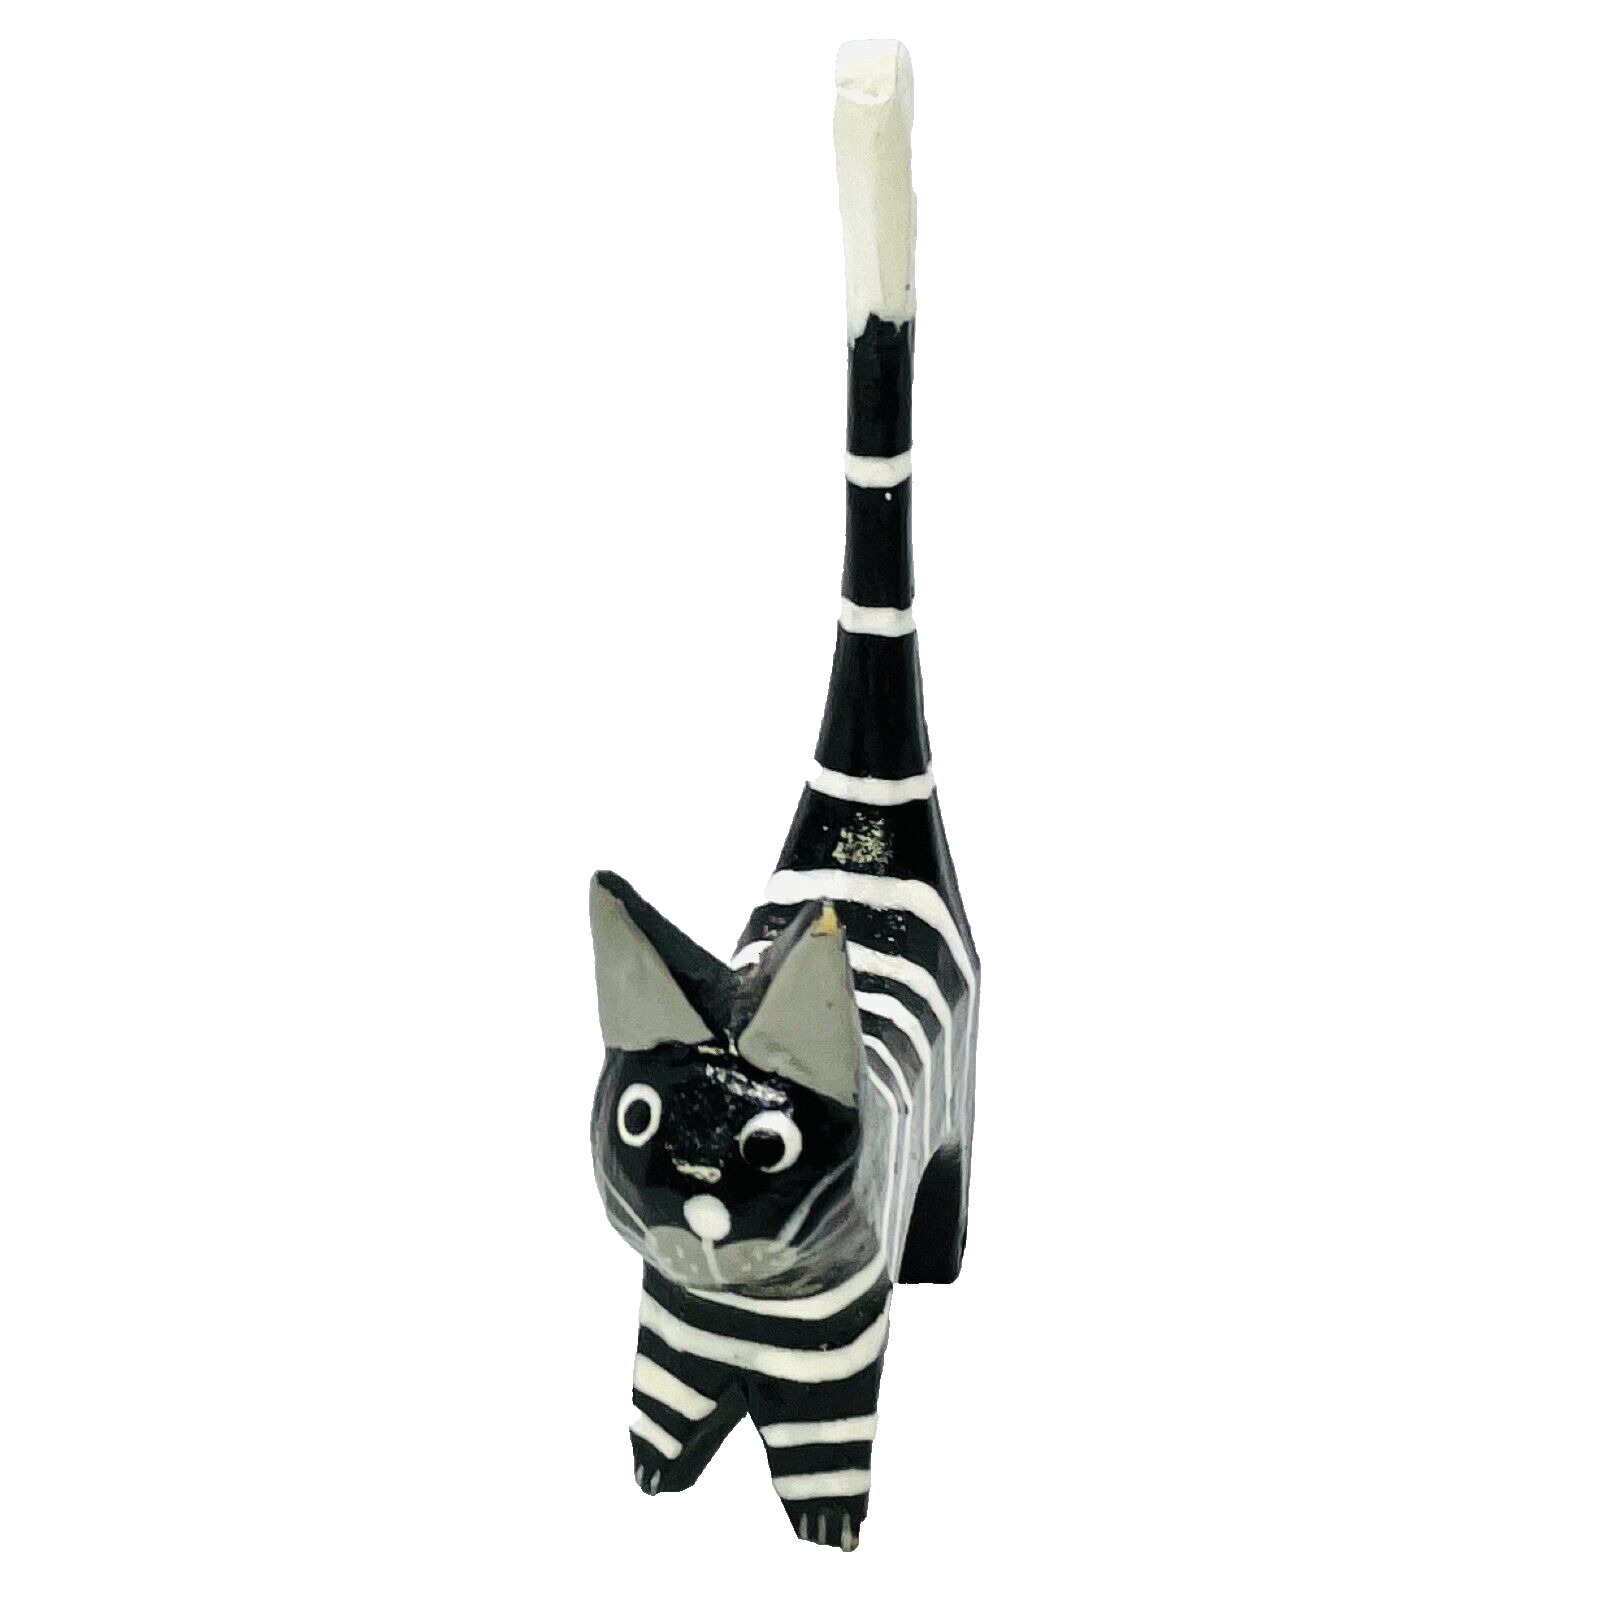 Bali Handmade Wooden Carved Cat Black, white stripes Indonesia 3in